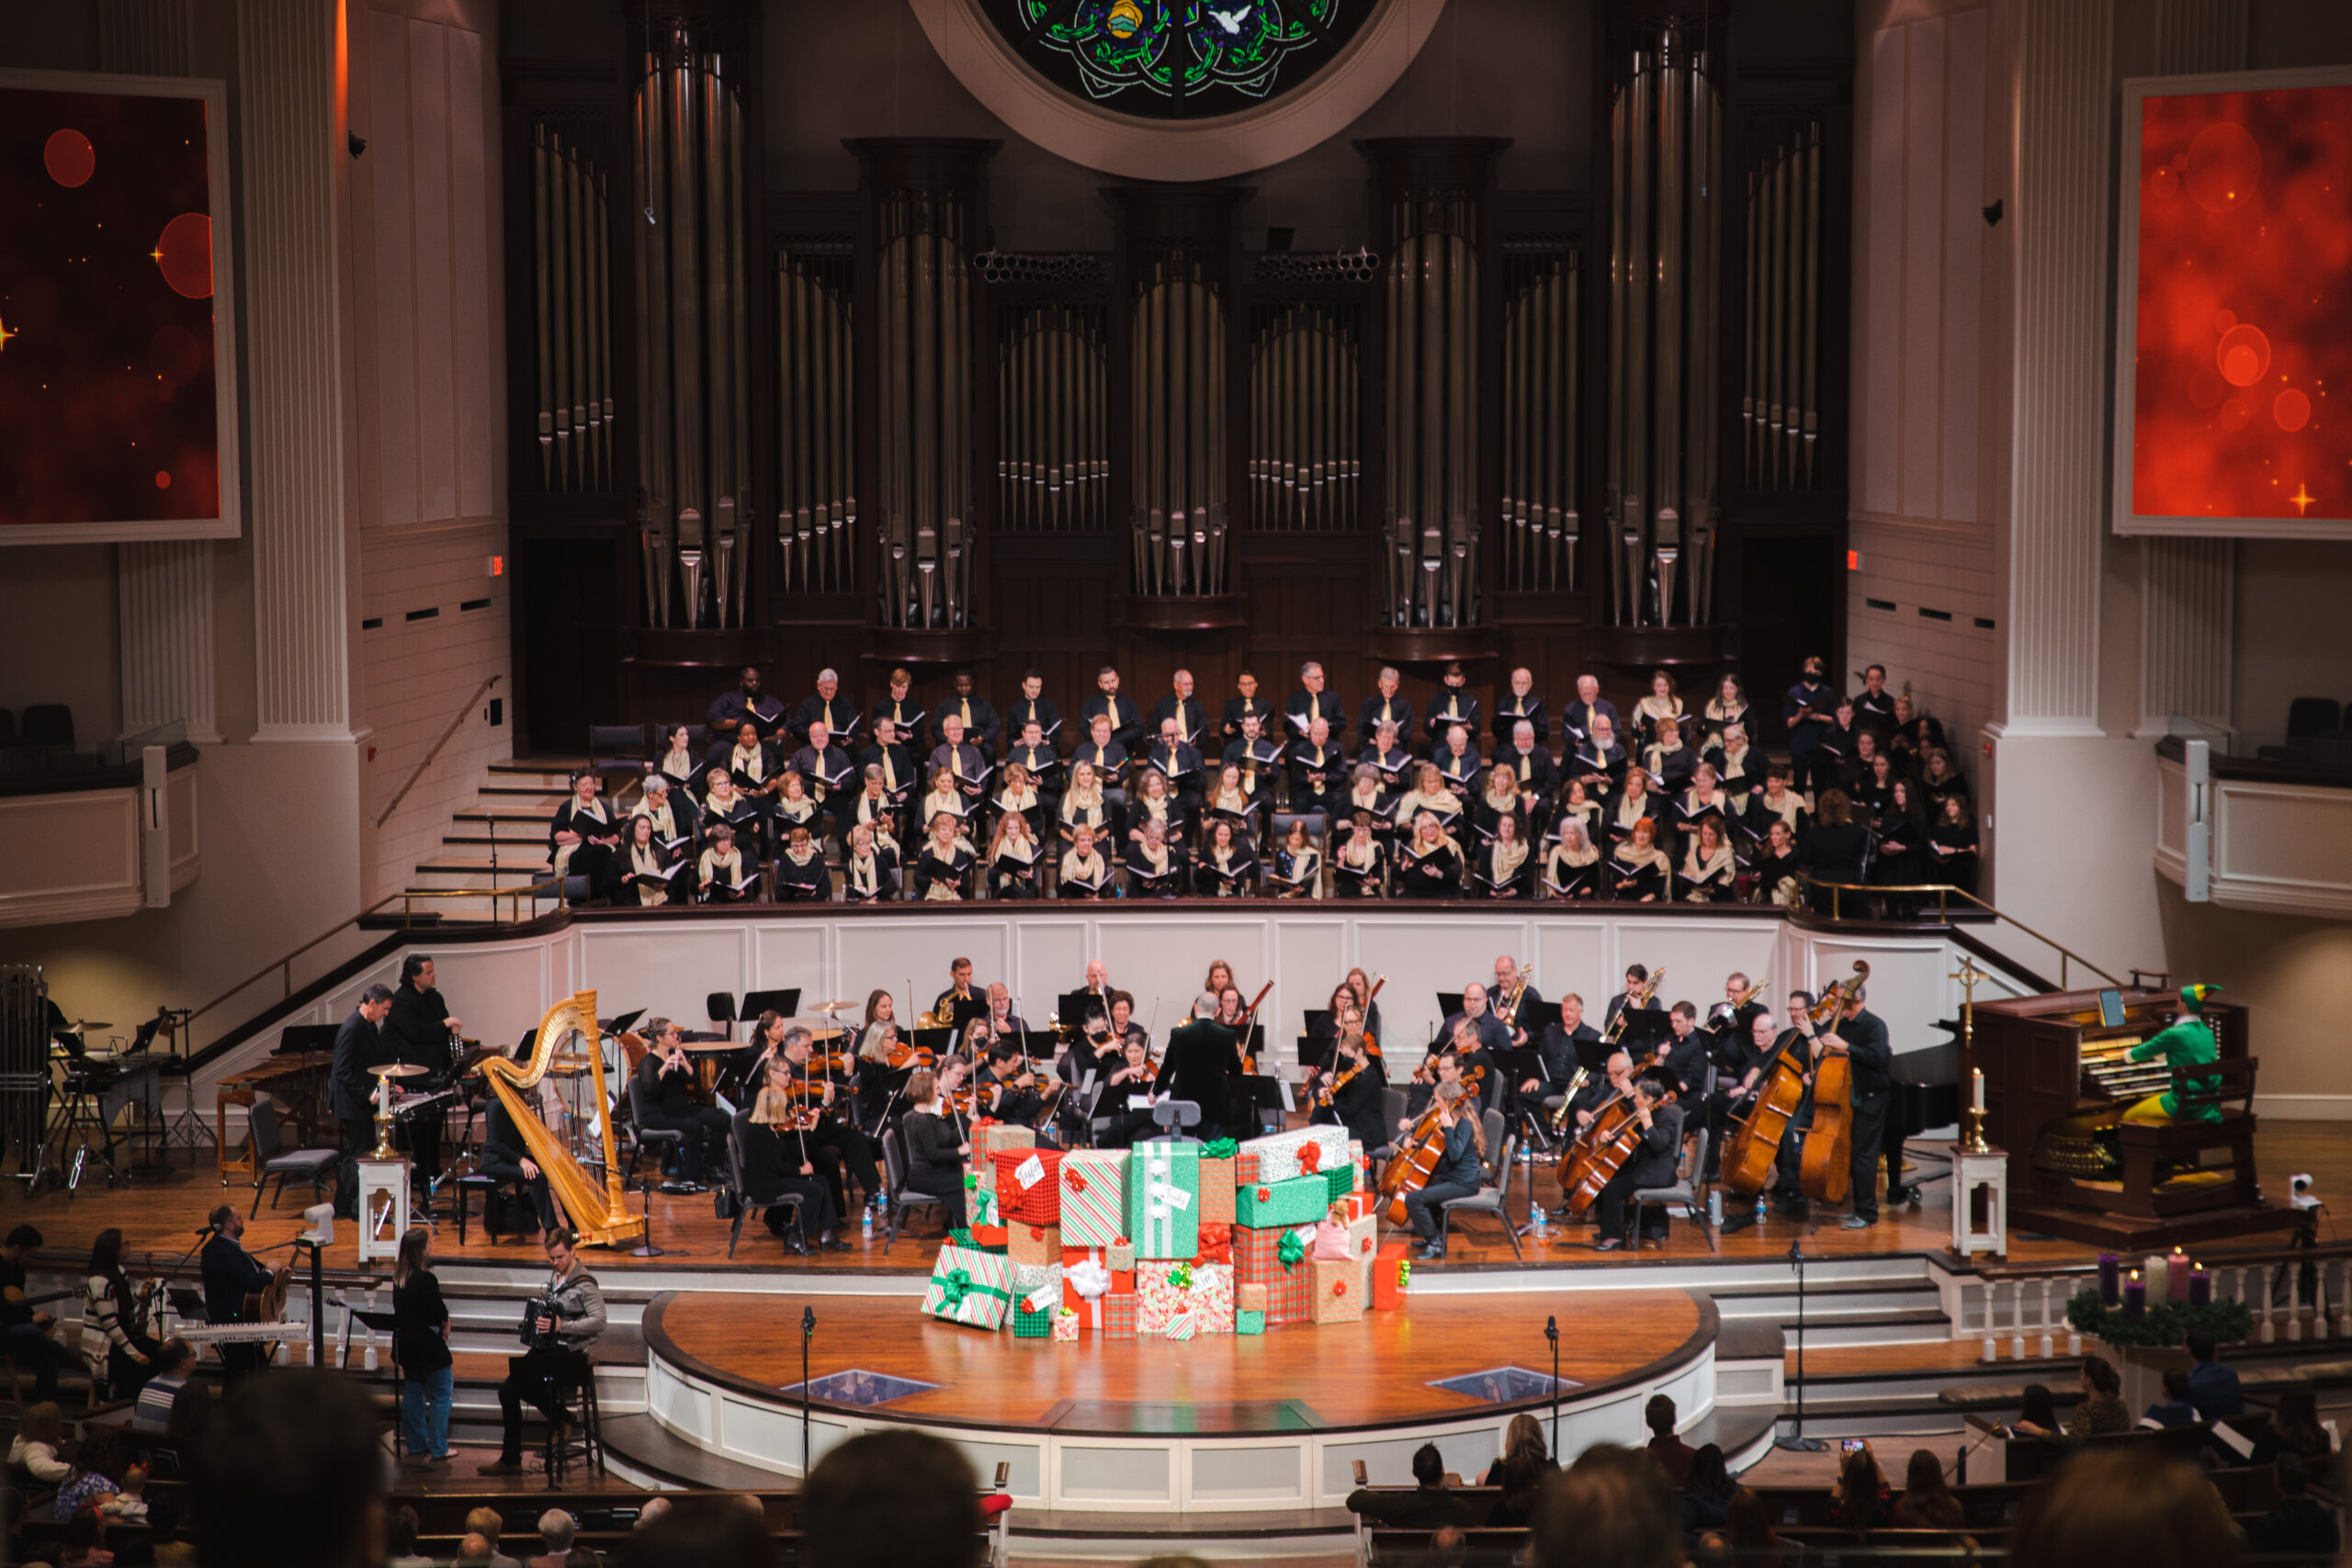 Join us in the Sanctuary for carols, choirs, and the full orchestra.